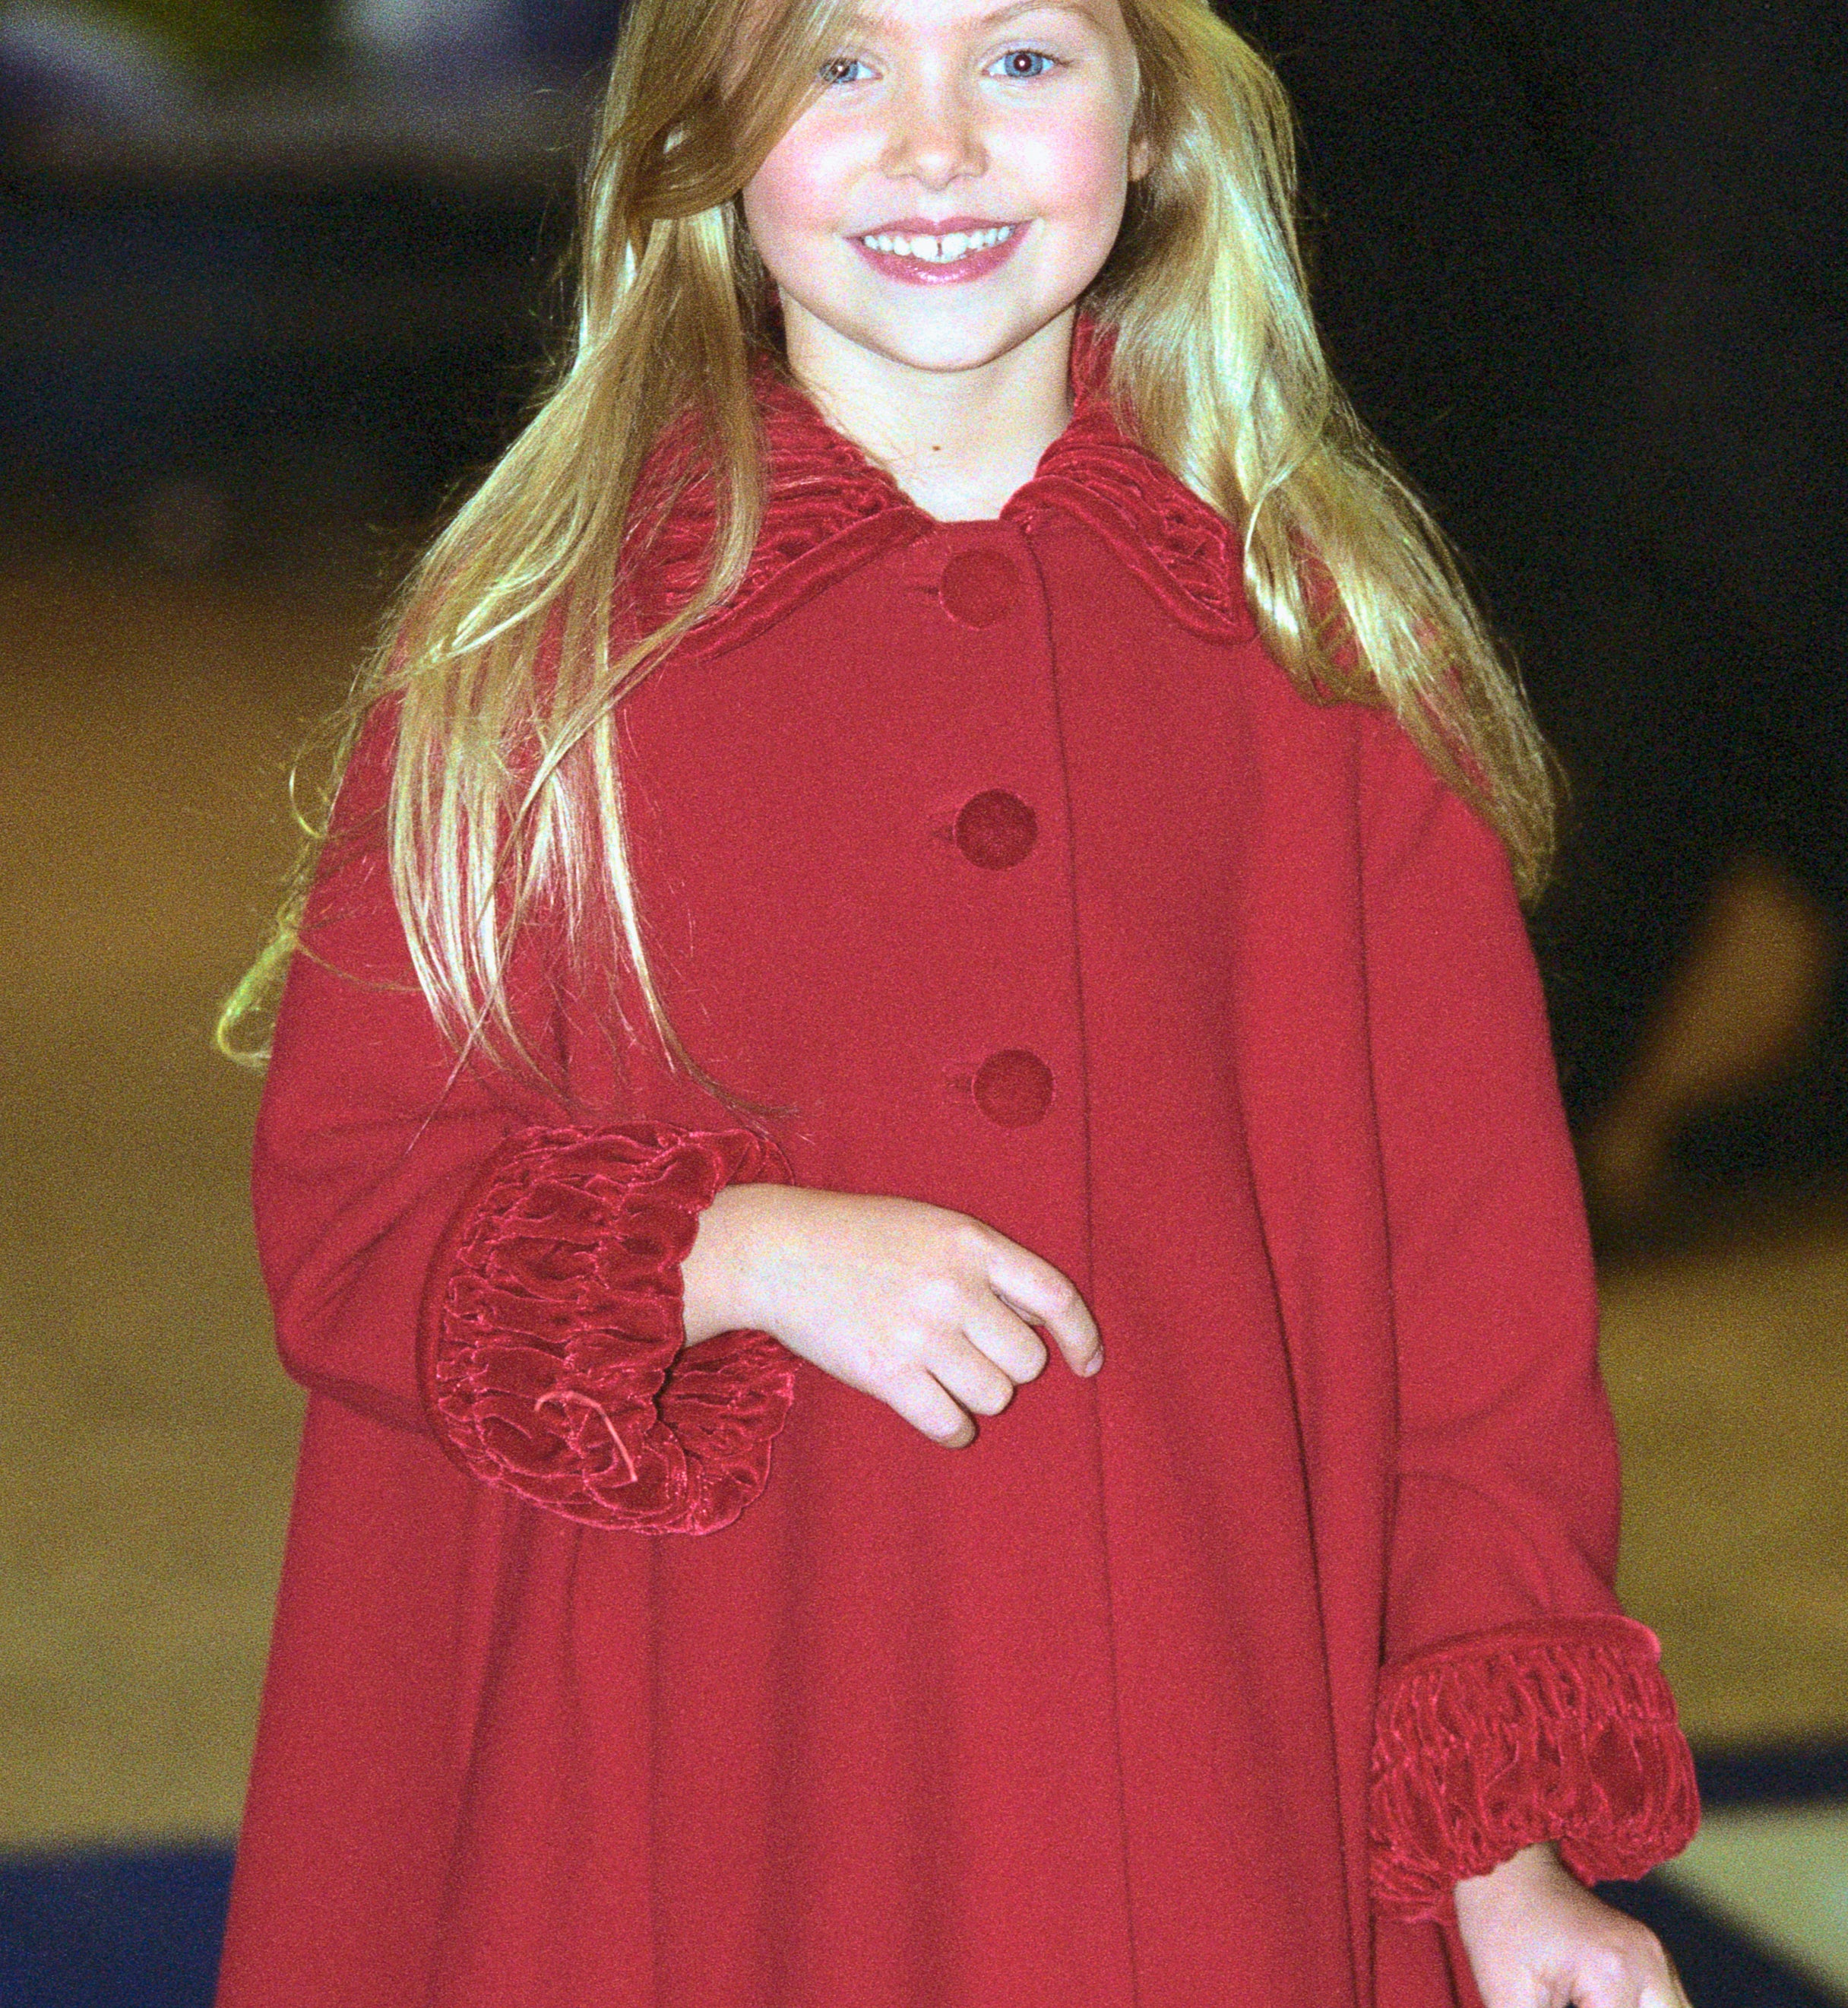 Close-up of Taylor as a child smiling at an event